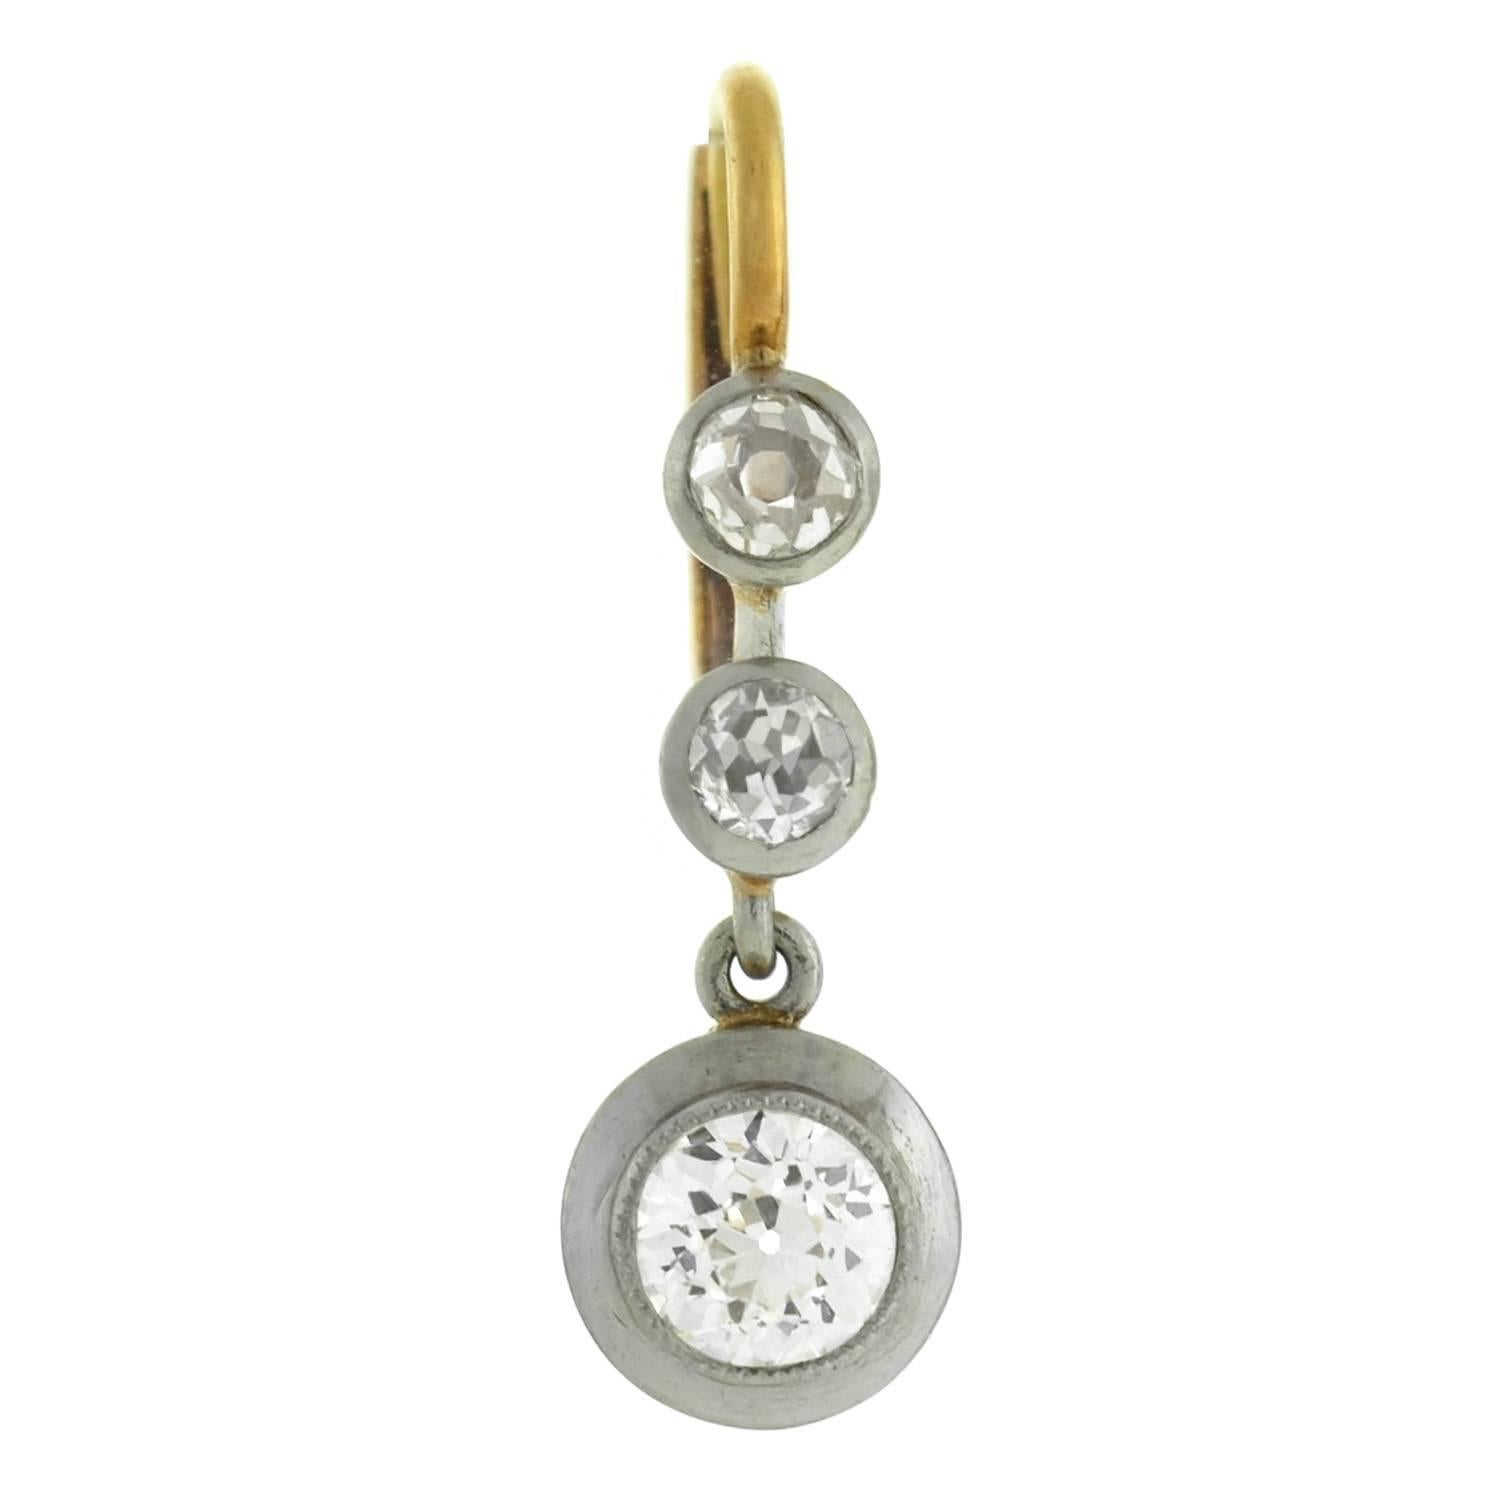 An exquisite pair of elegant diamond drop earrings! Crafted in 18kt gold and platinum, these Edwardian era earrings (ca1910) have a stunning old Mine Cut diamond encrusted design. The surface of each earring is lined with a three bezel set stones,